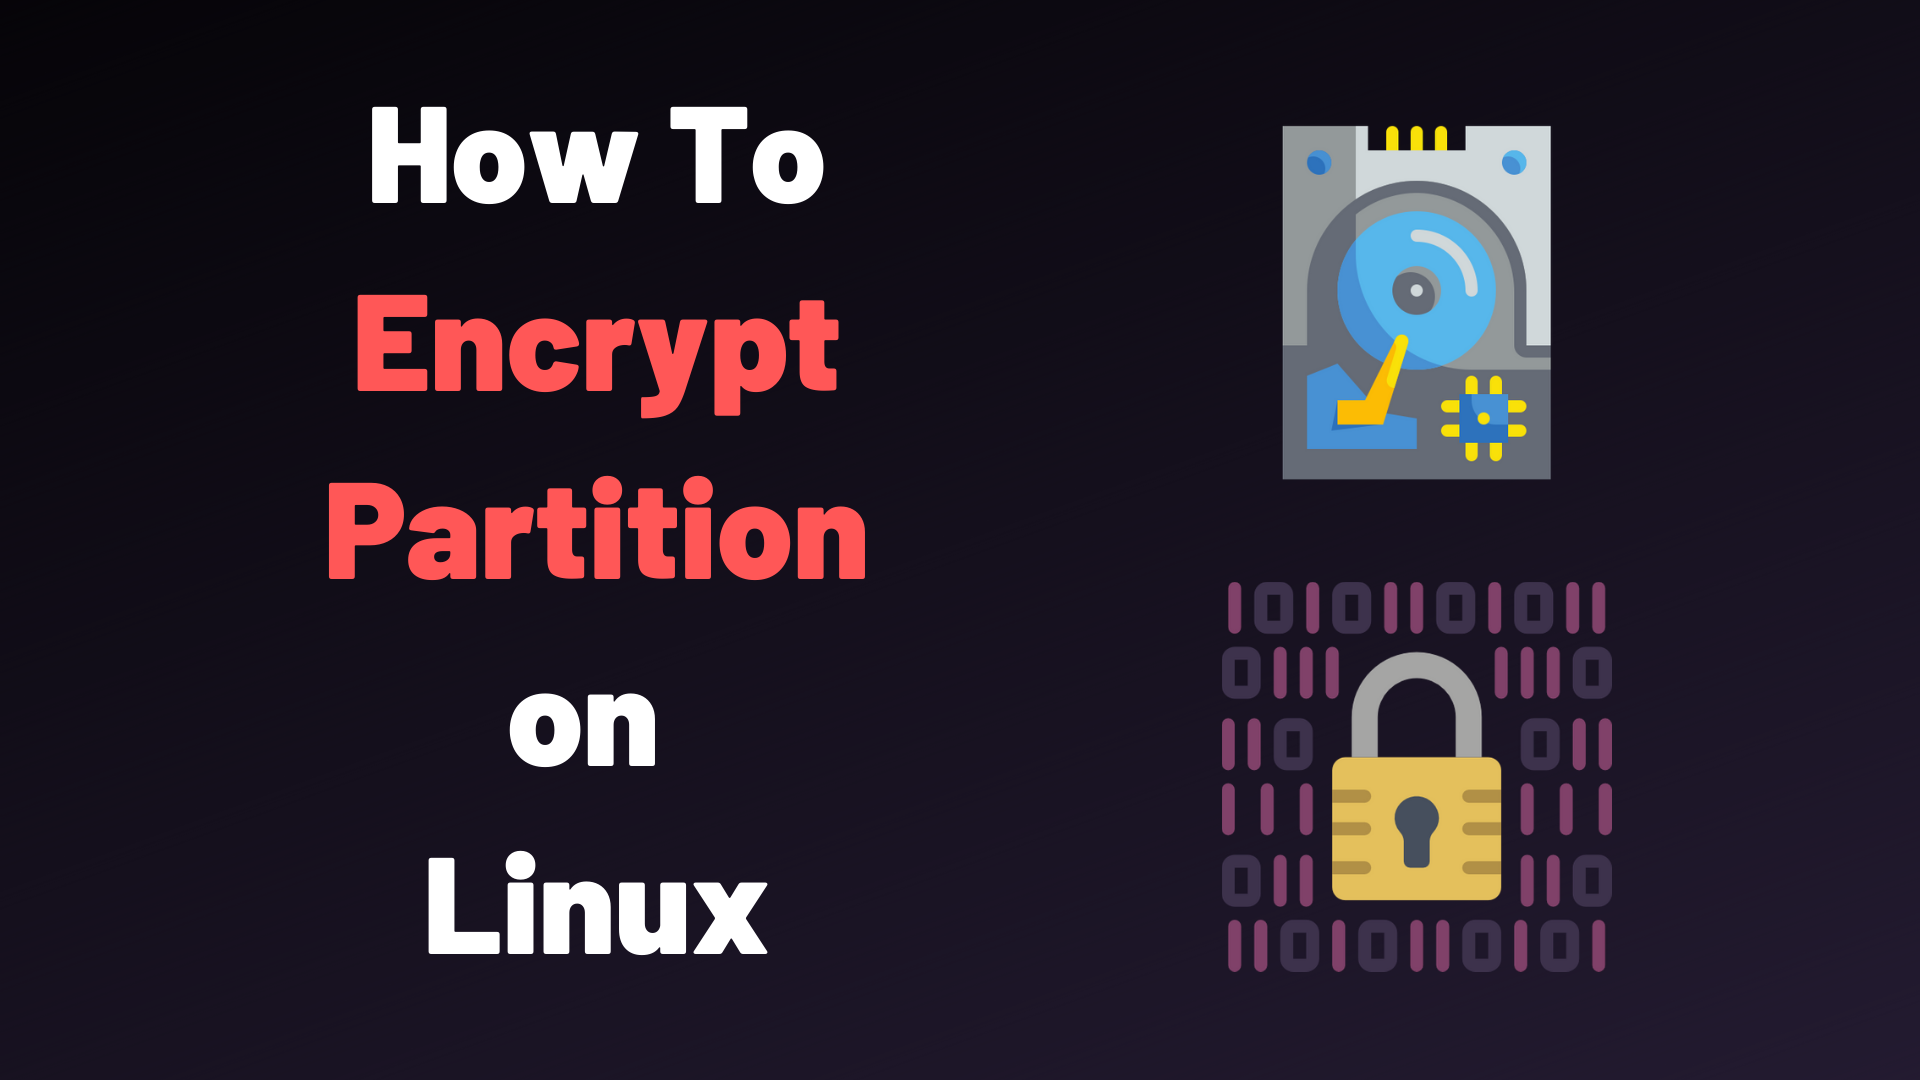 How To Encrypt Partition on Linux